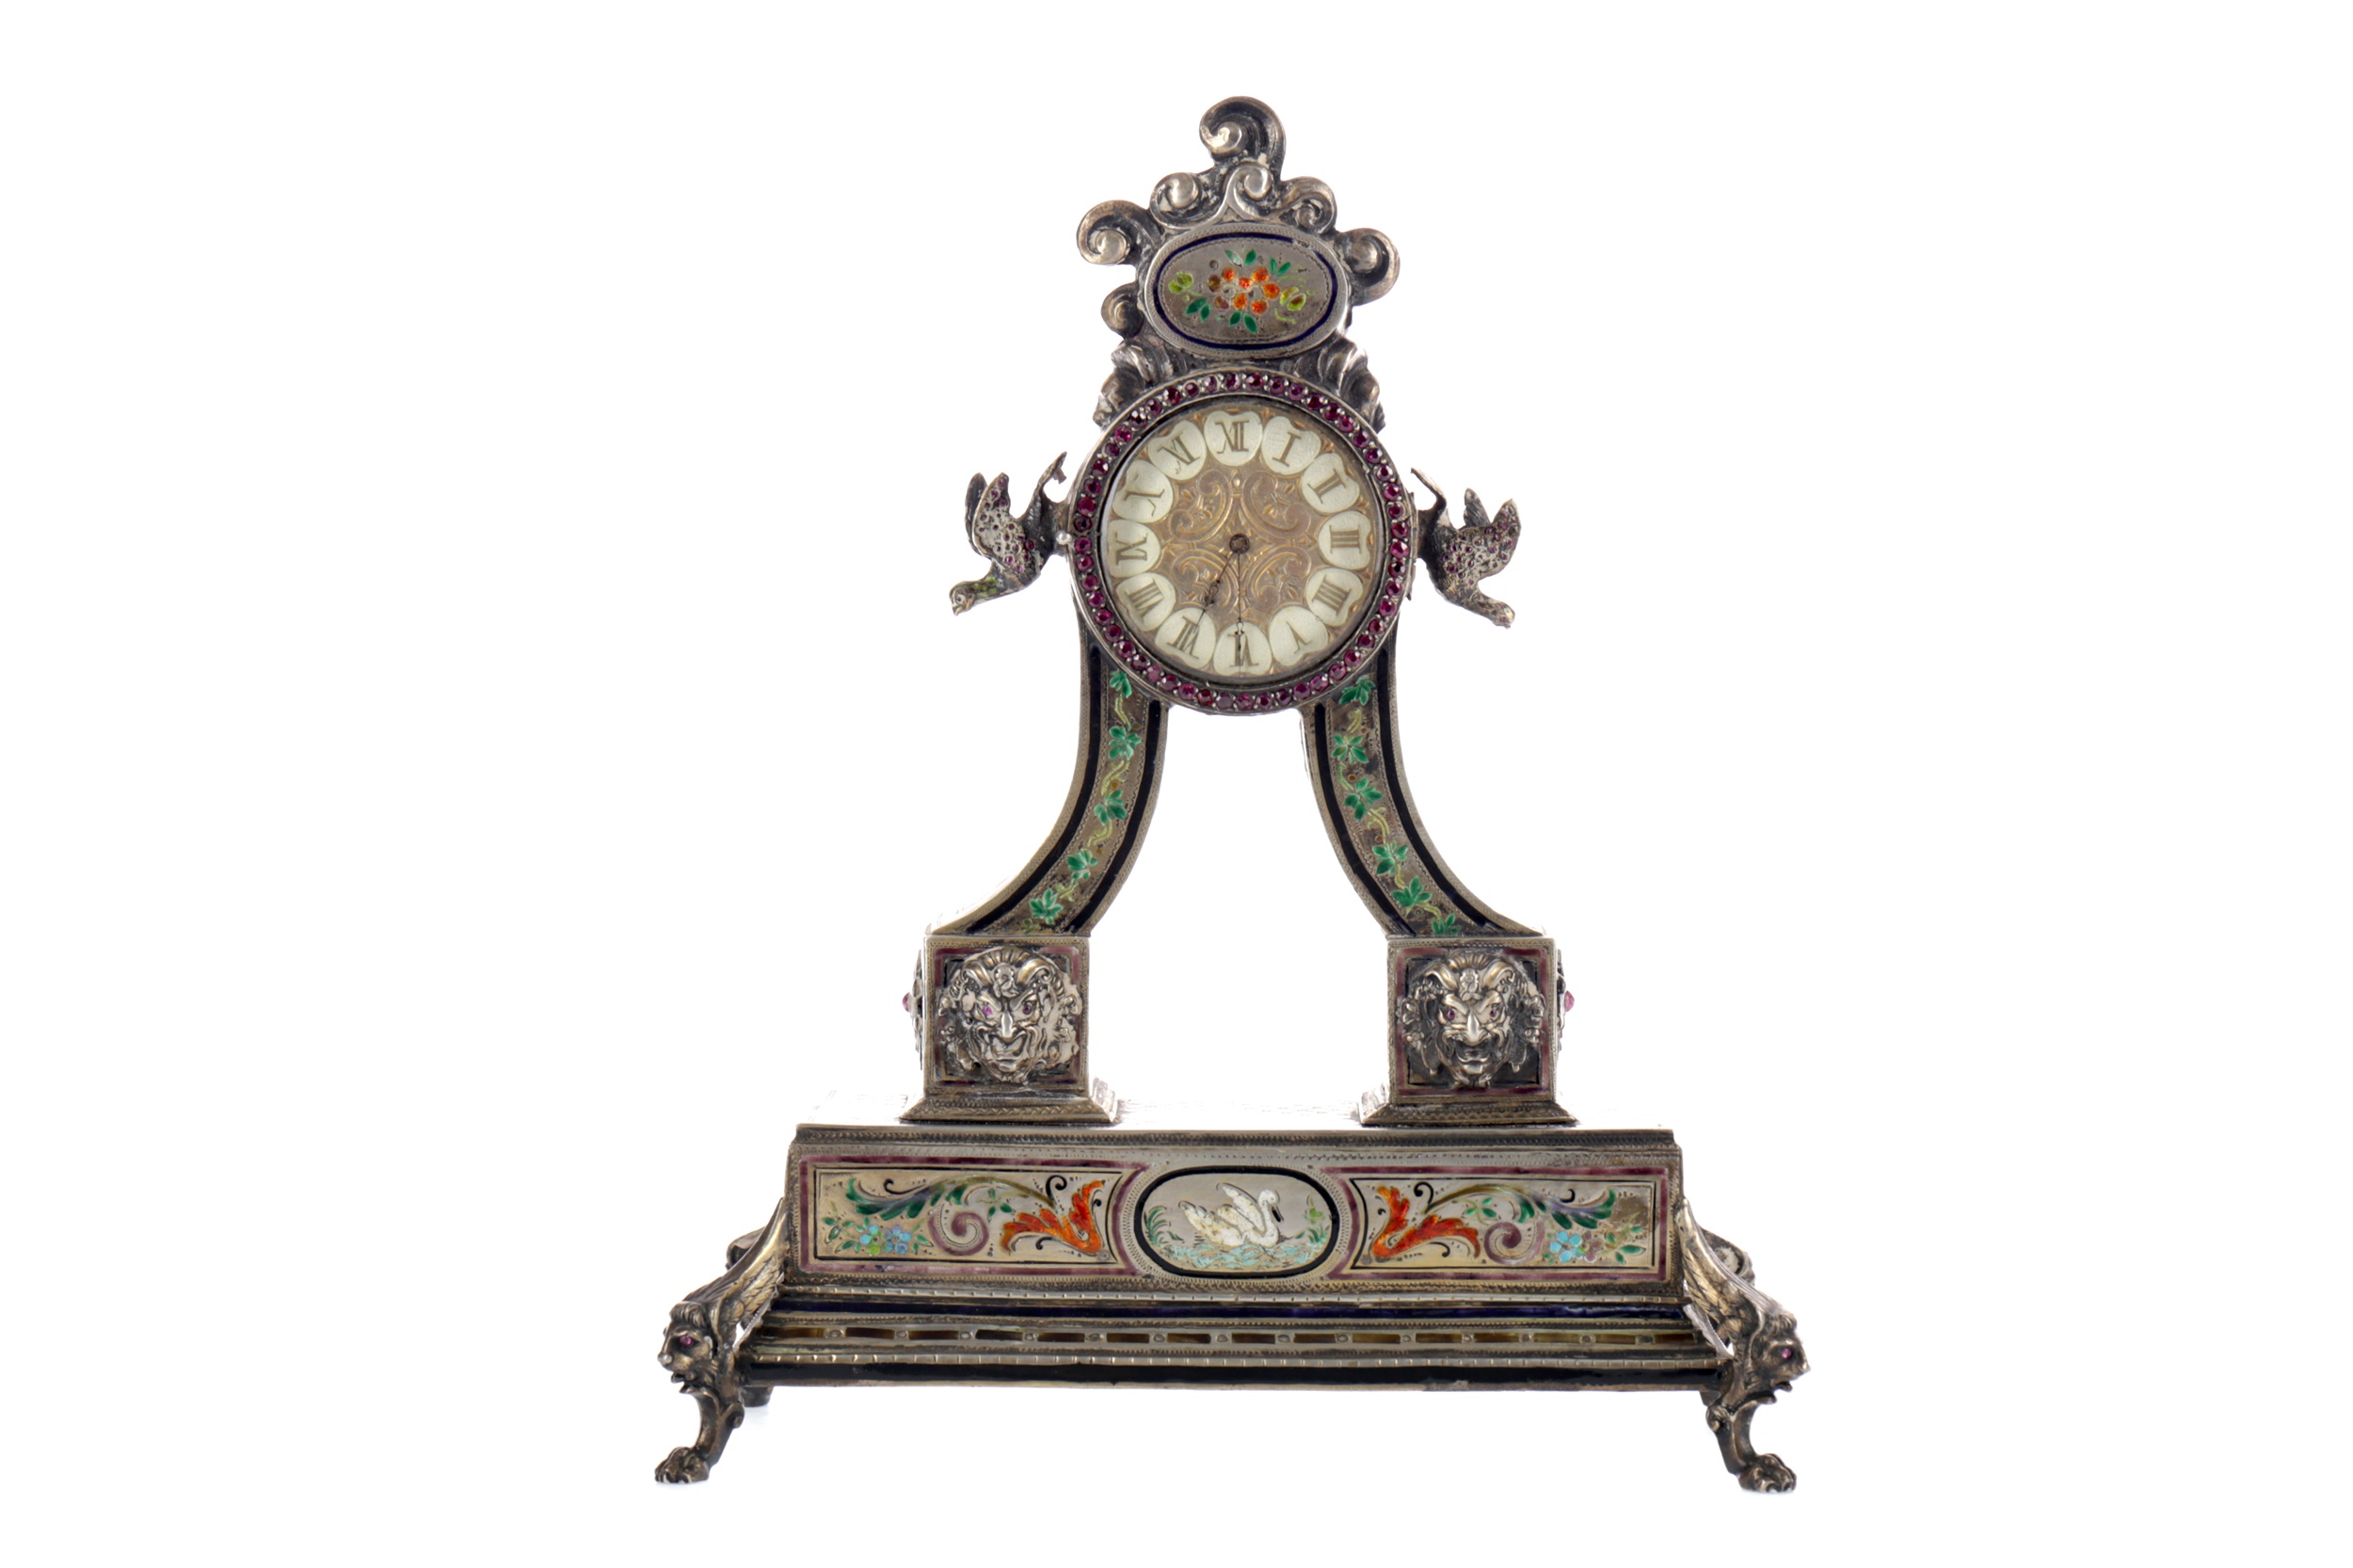 A LATE 19TH CENTURY VIENNESE SILVER AND ENAMEL TABLE CLOCK